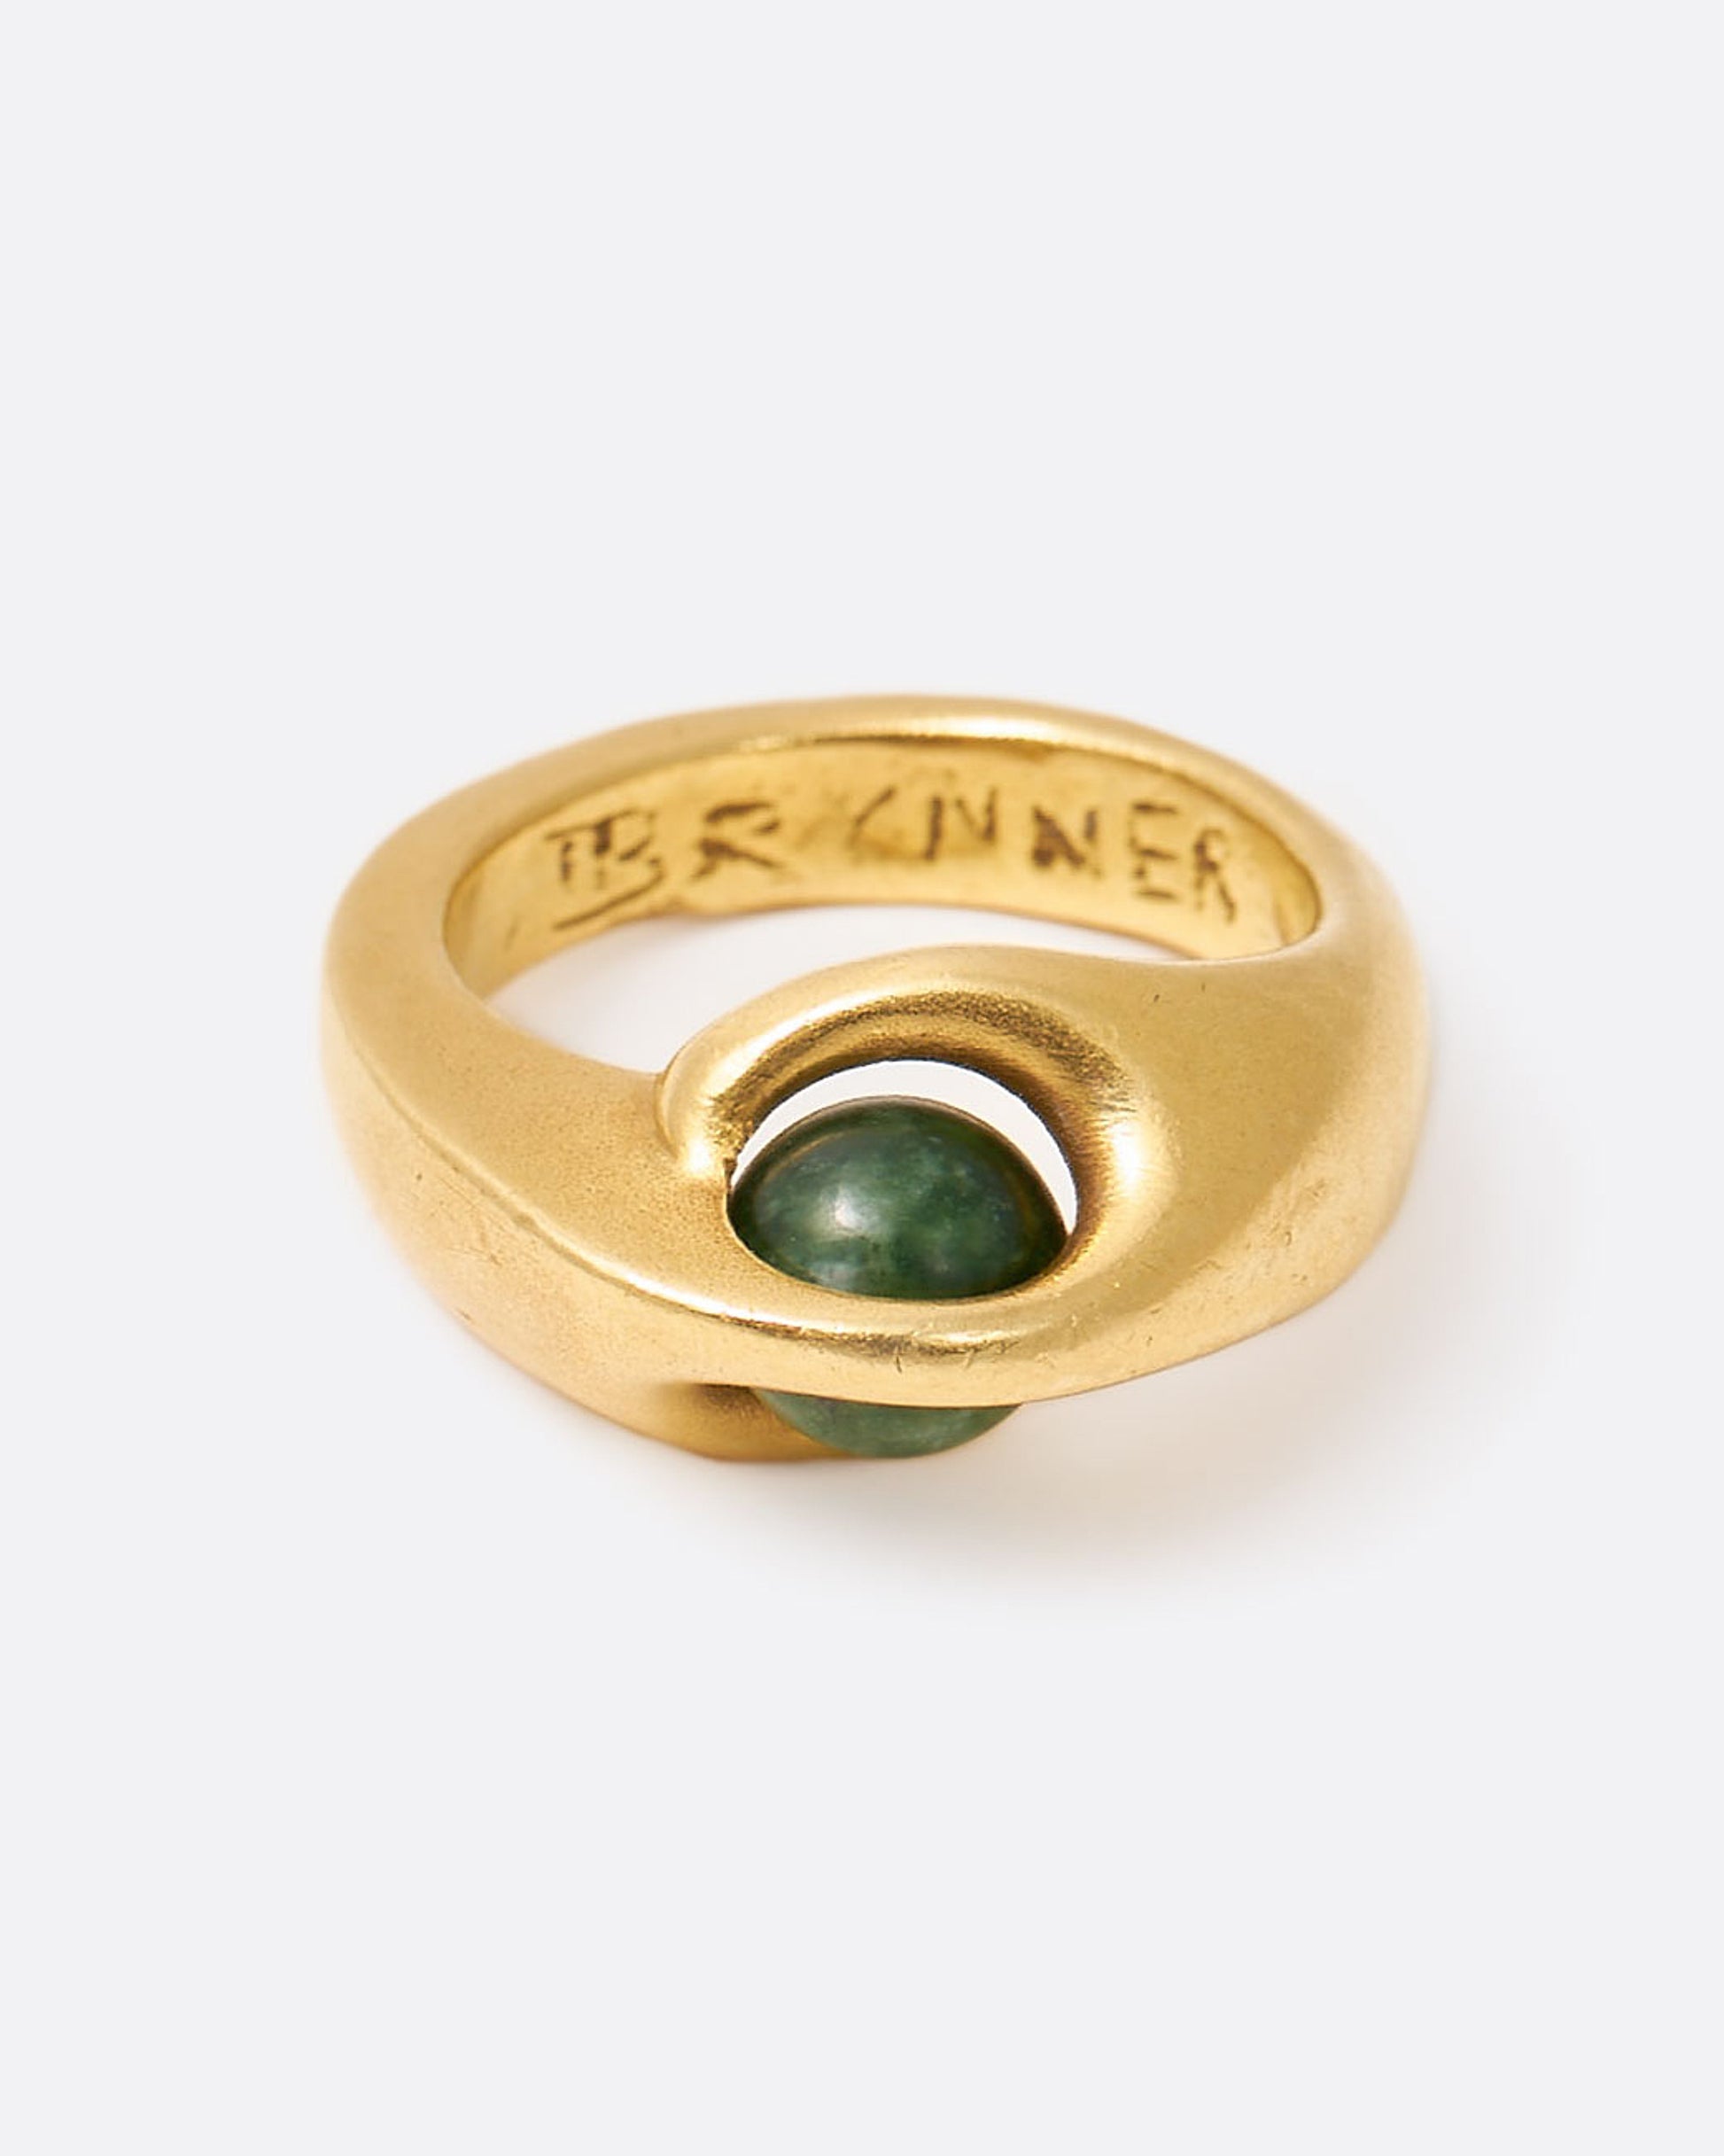 Yellow gold ring with floating green sodalite sphere, shown from the front.